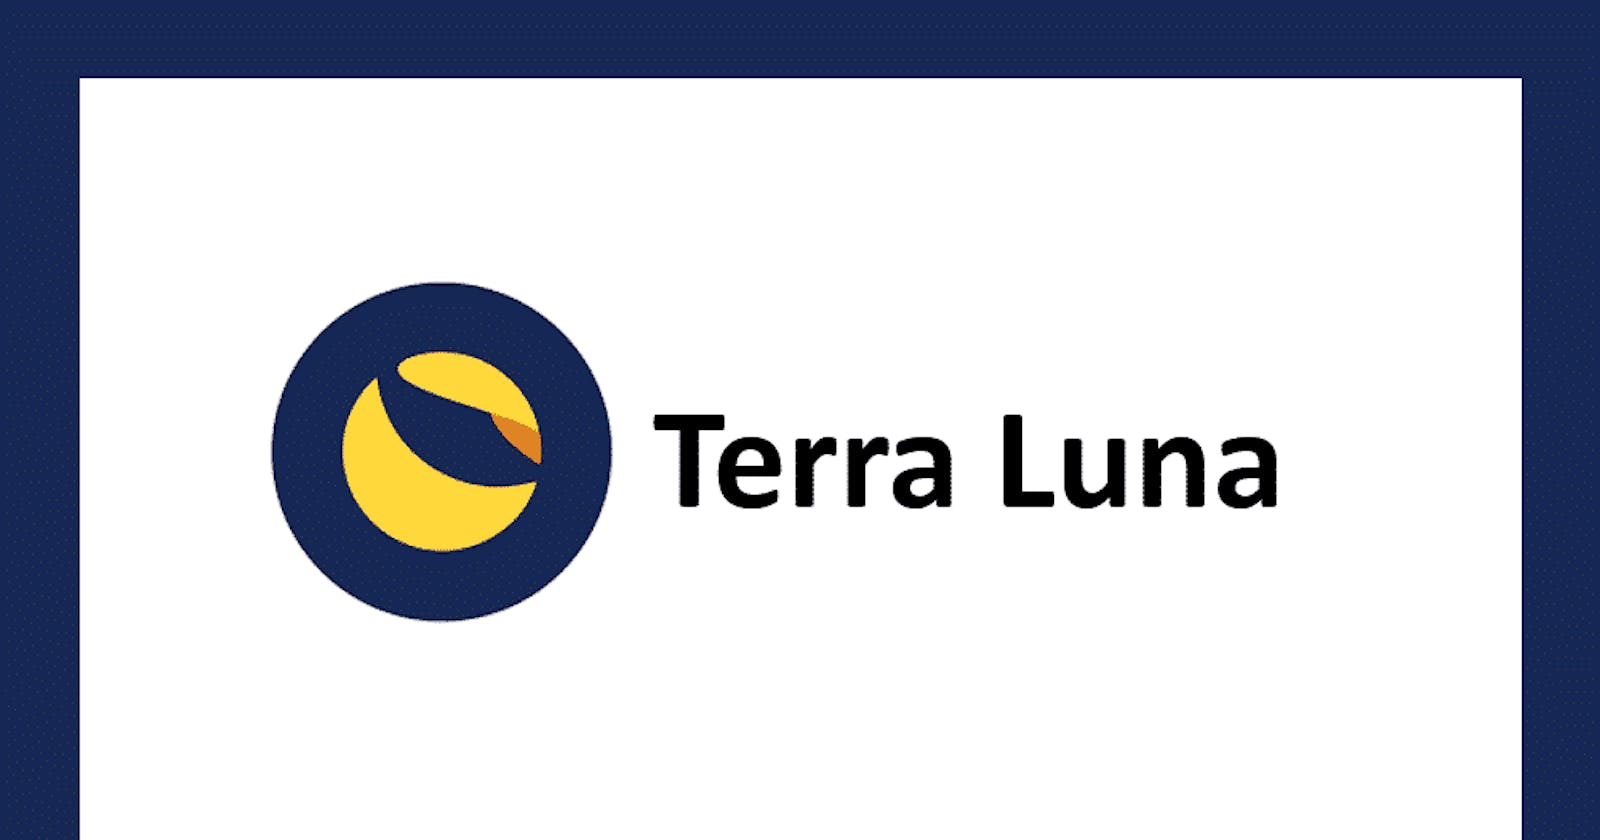 Going, Going, Gone ... How Terra Luna Lost 99.8% of it's value in 4 days